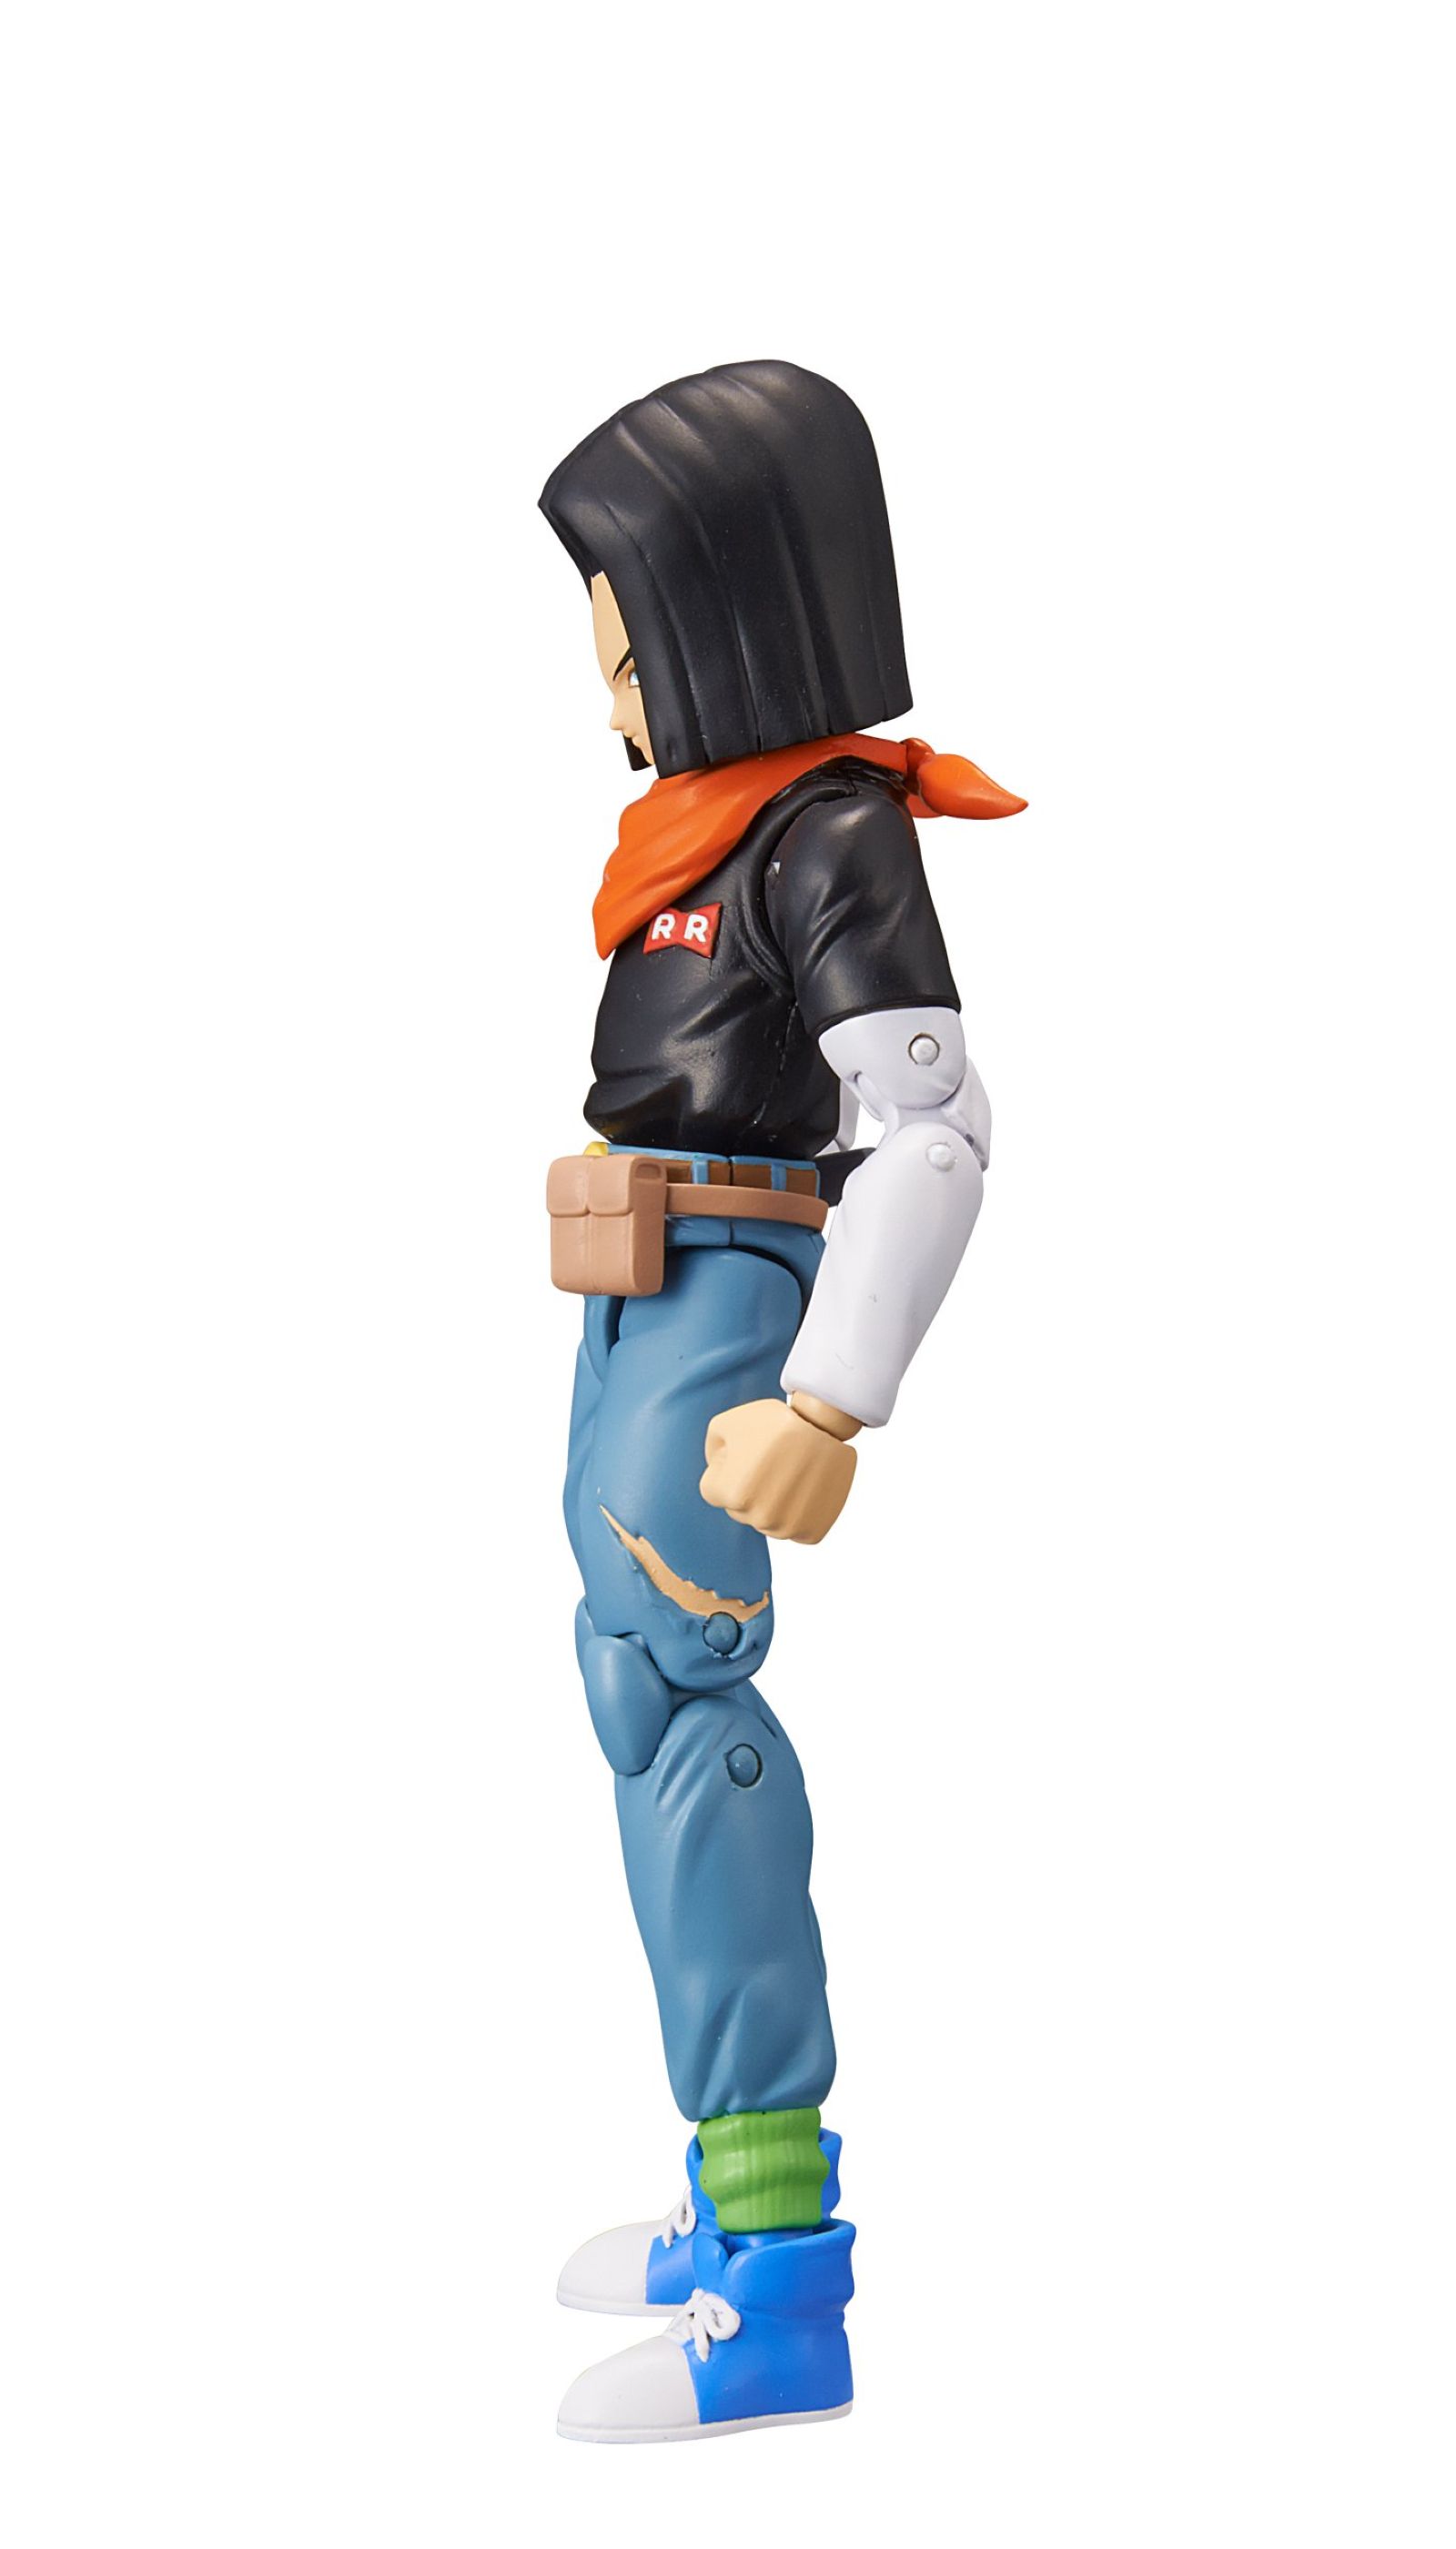 Dragonball Super Dragon Stars - Android 17 6.5 Action Figure 